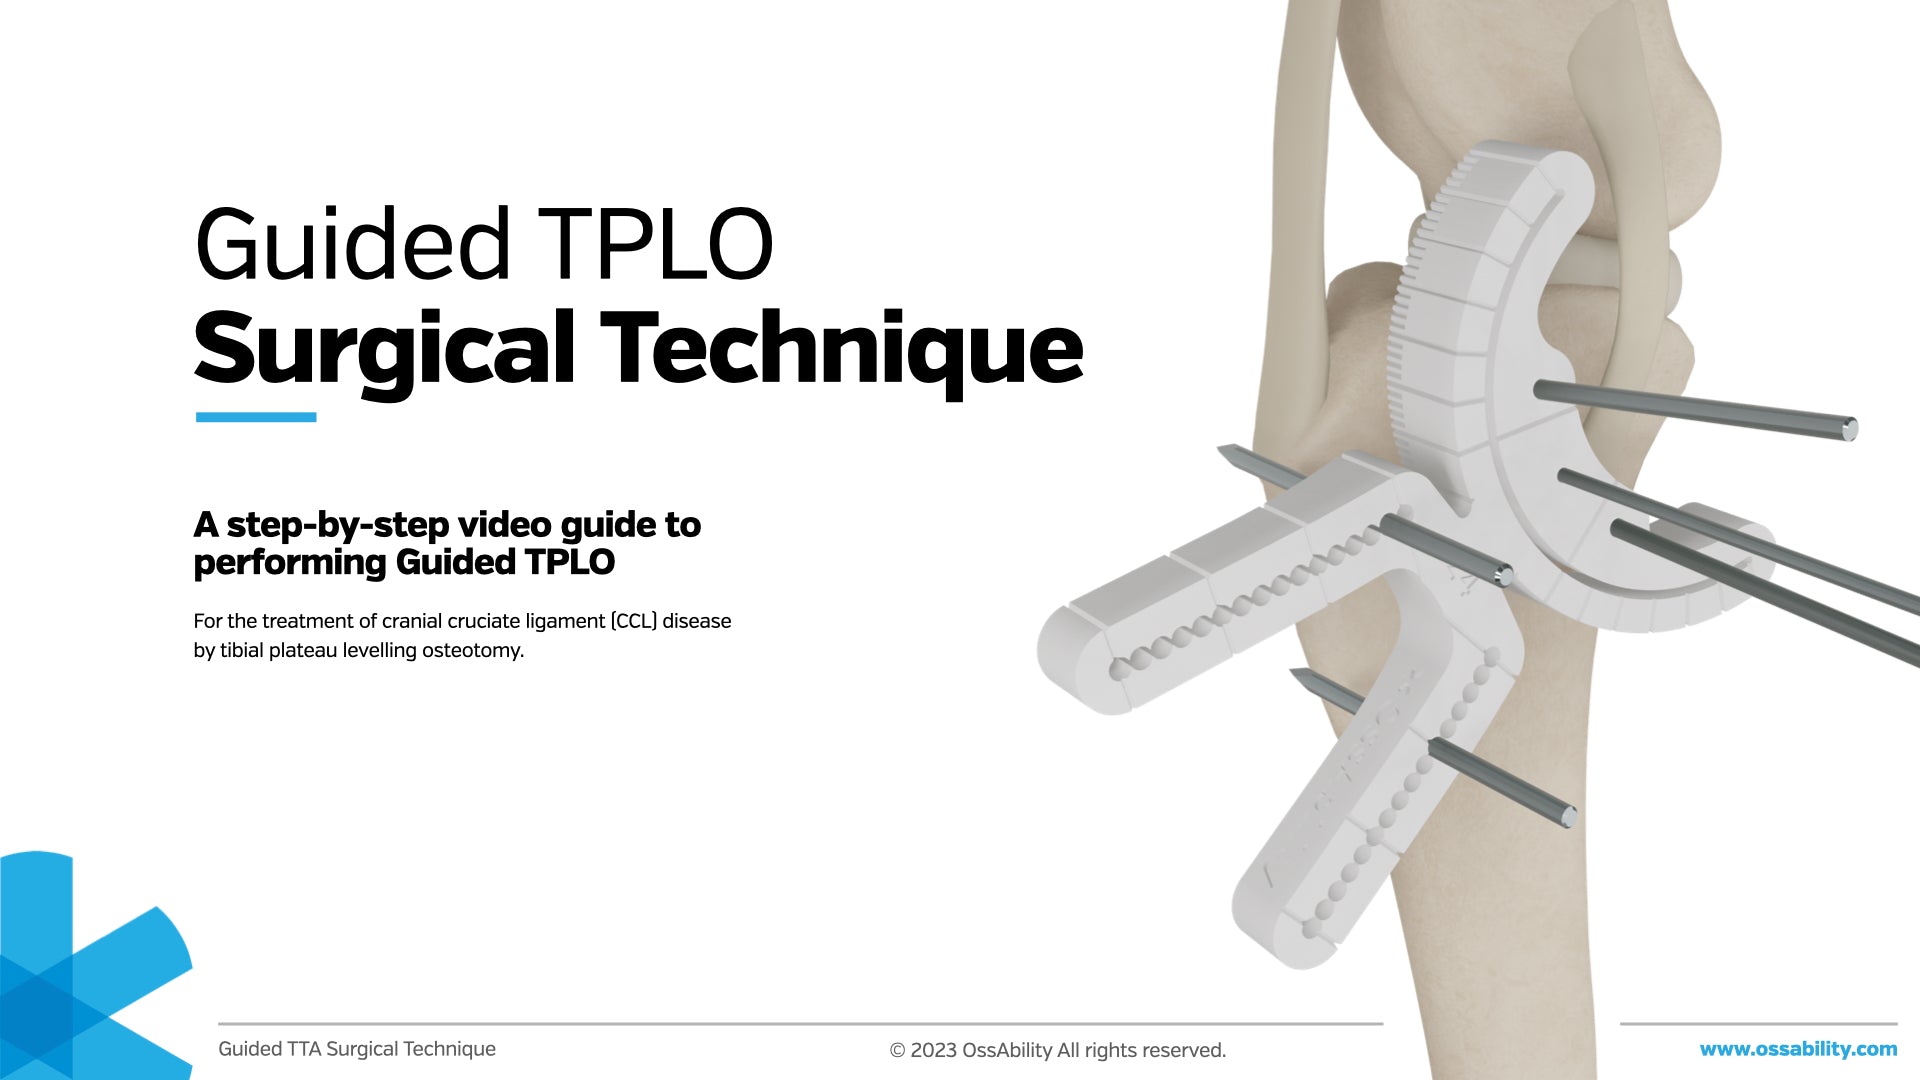 Load video: Guided TPLO Surgical Technique Video